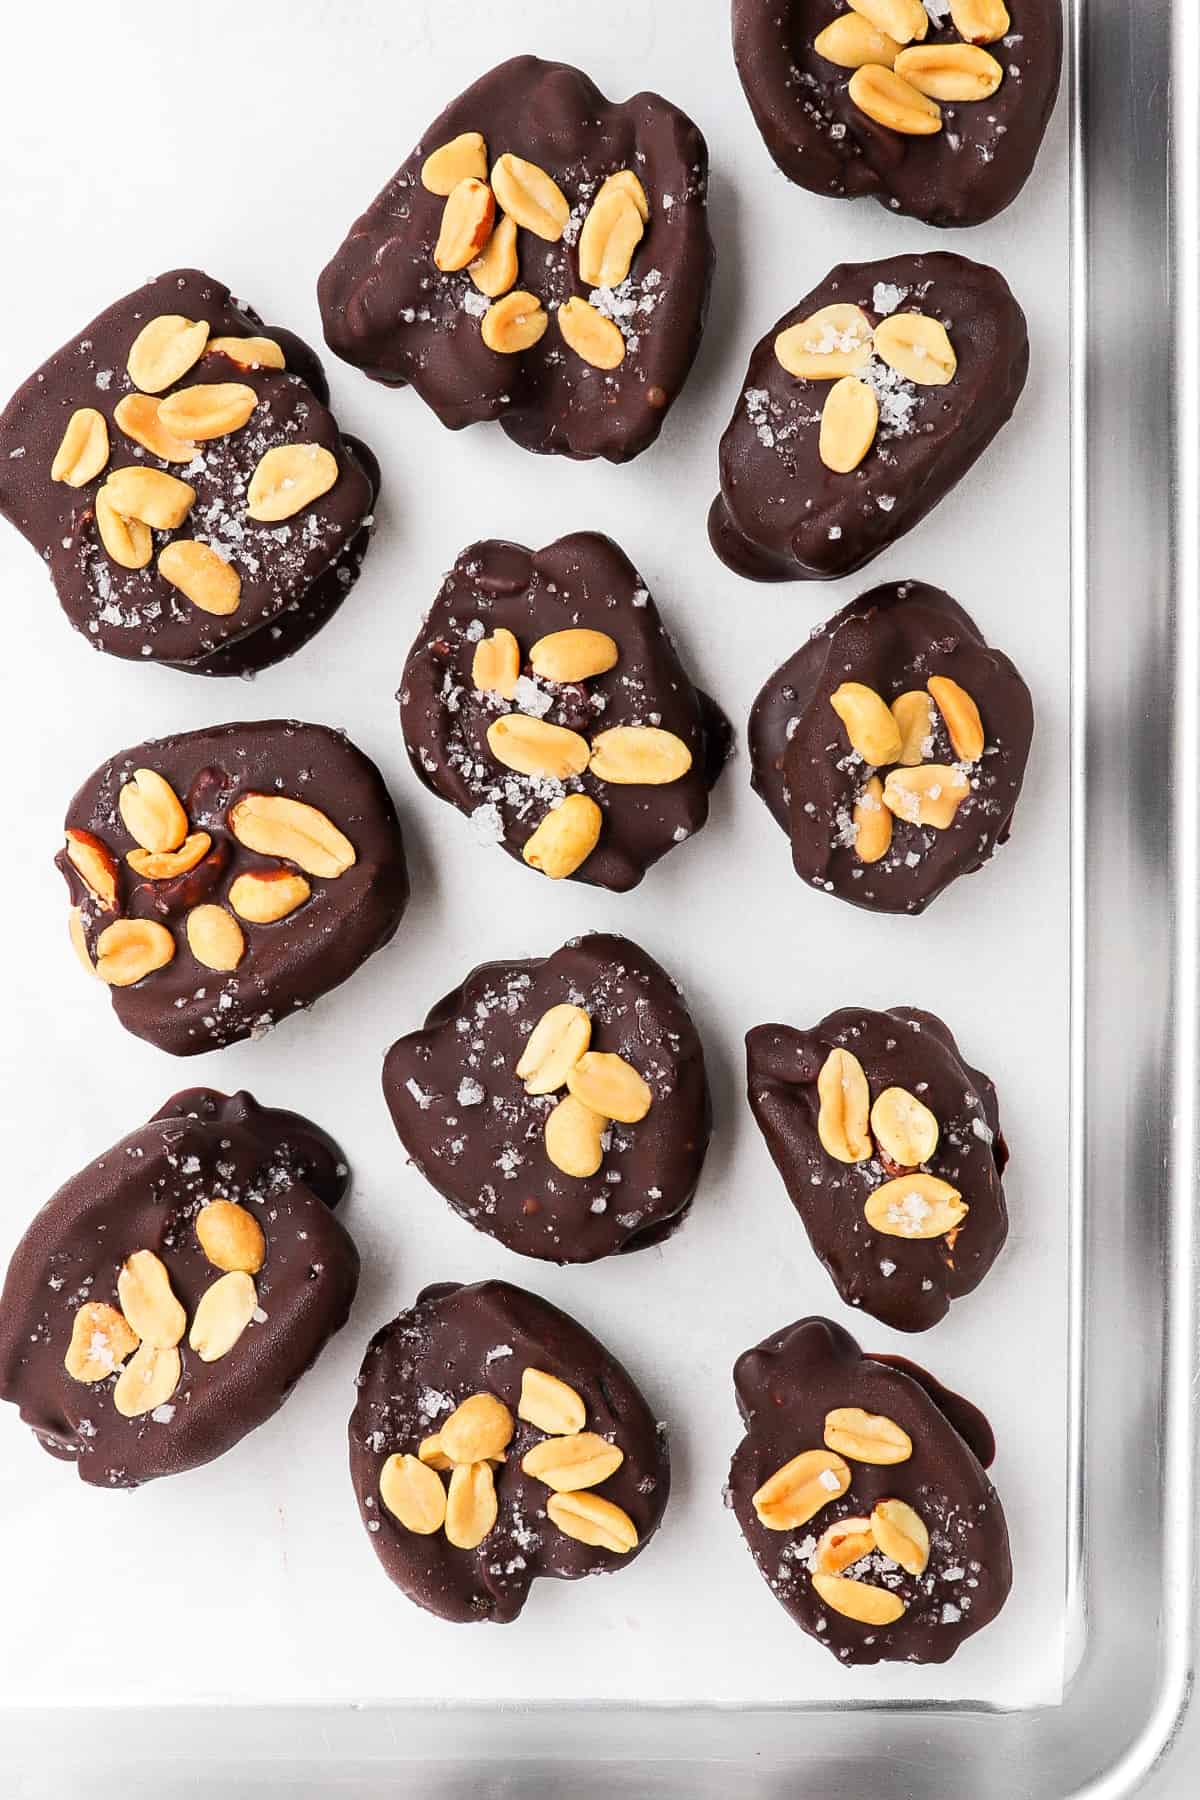 Chocolate covered dates with peanuts.